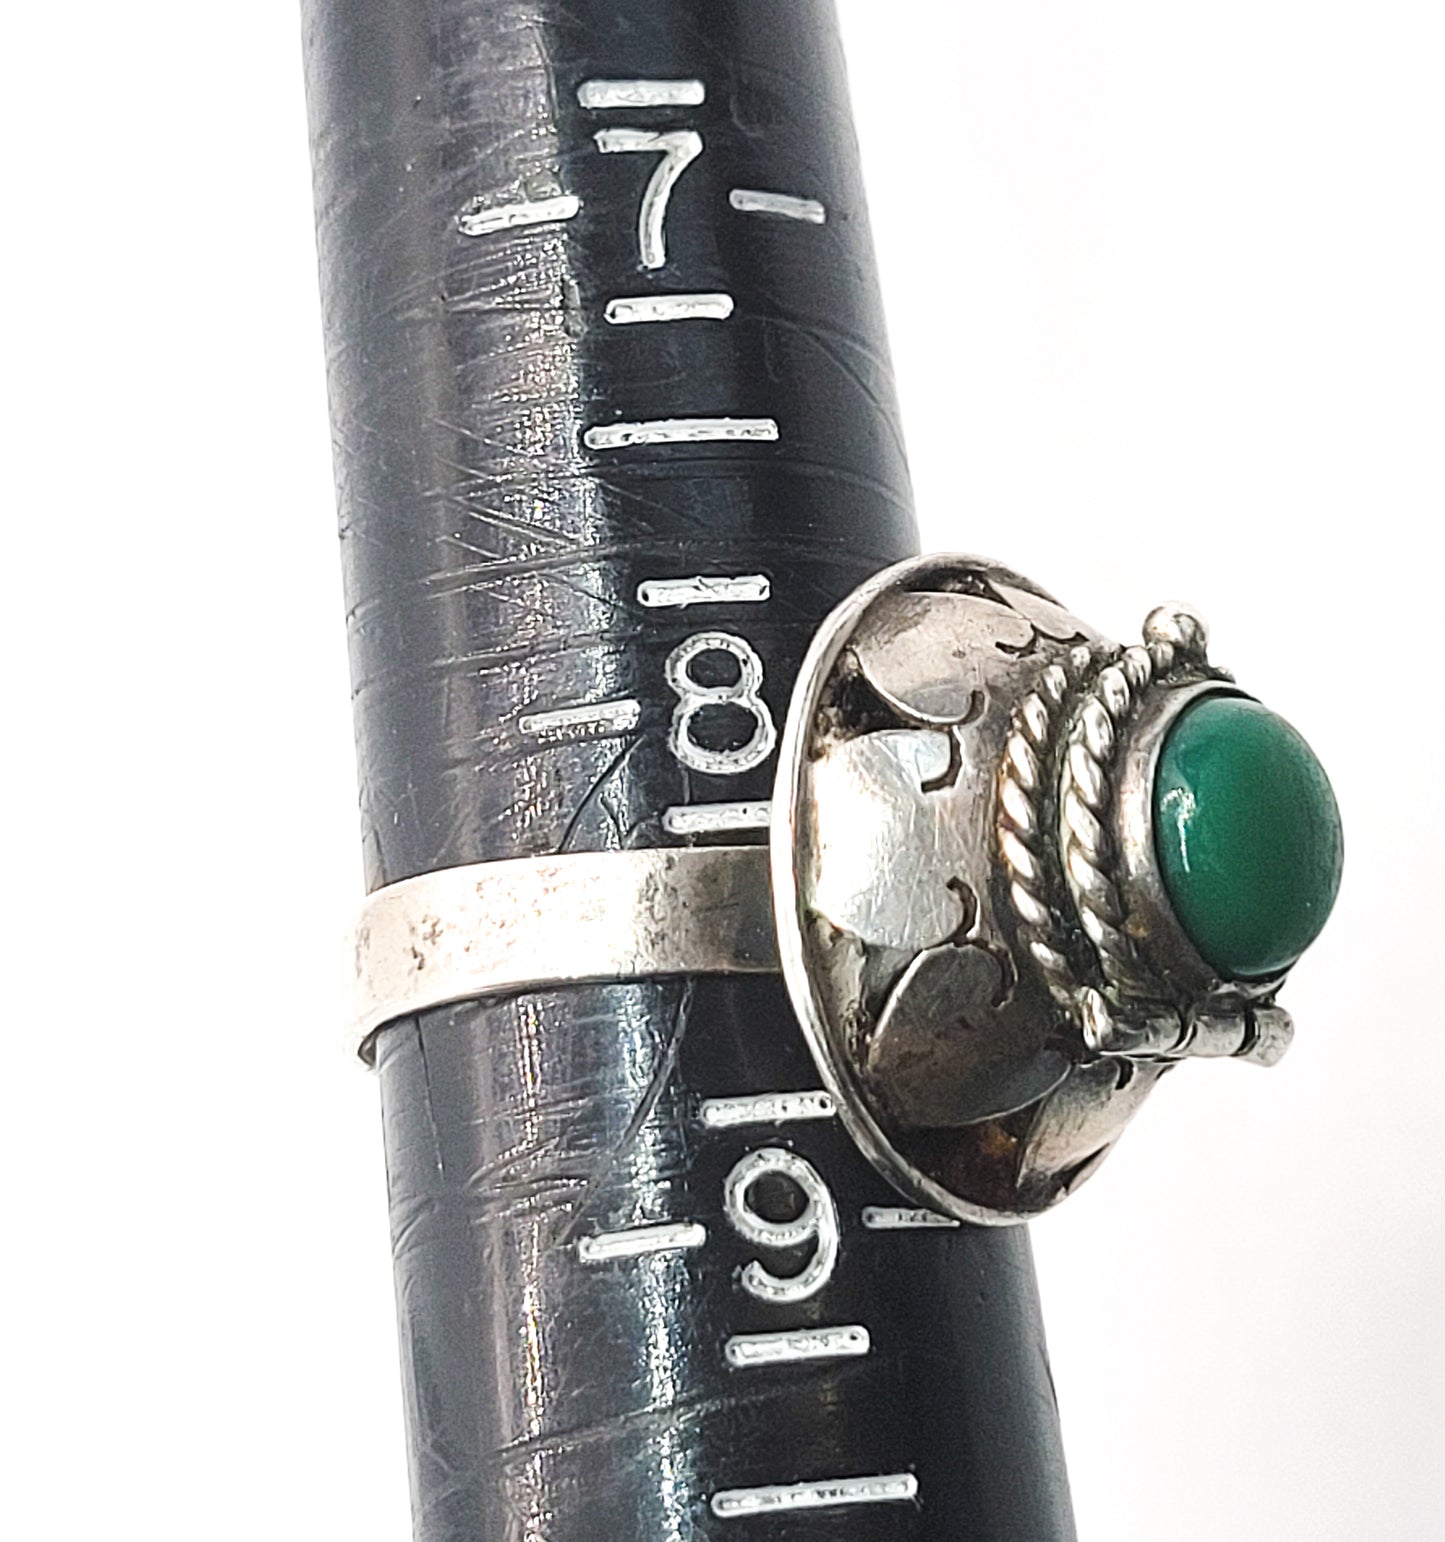 Poison Ring vintage Taxco Mexico green gemstone sterling silver eagle mark ring adjustable